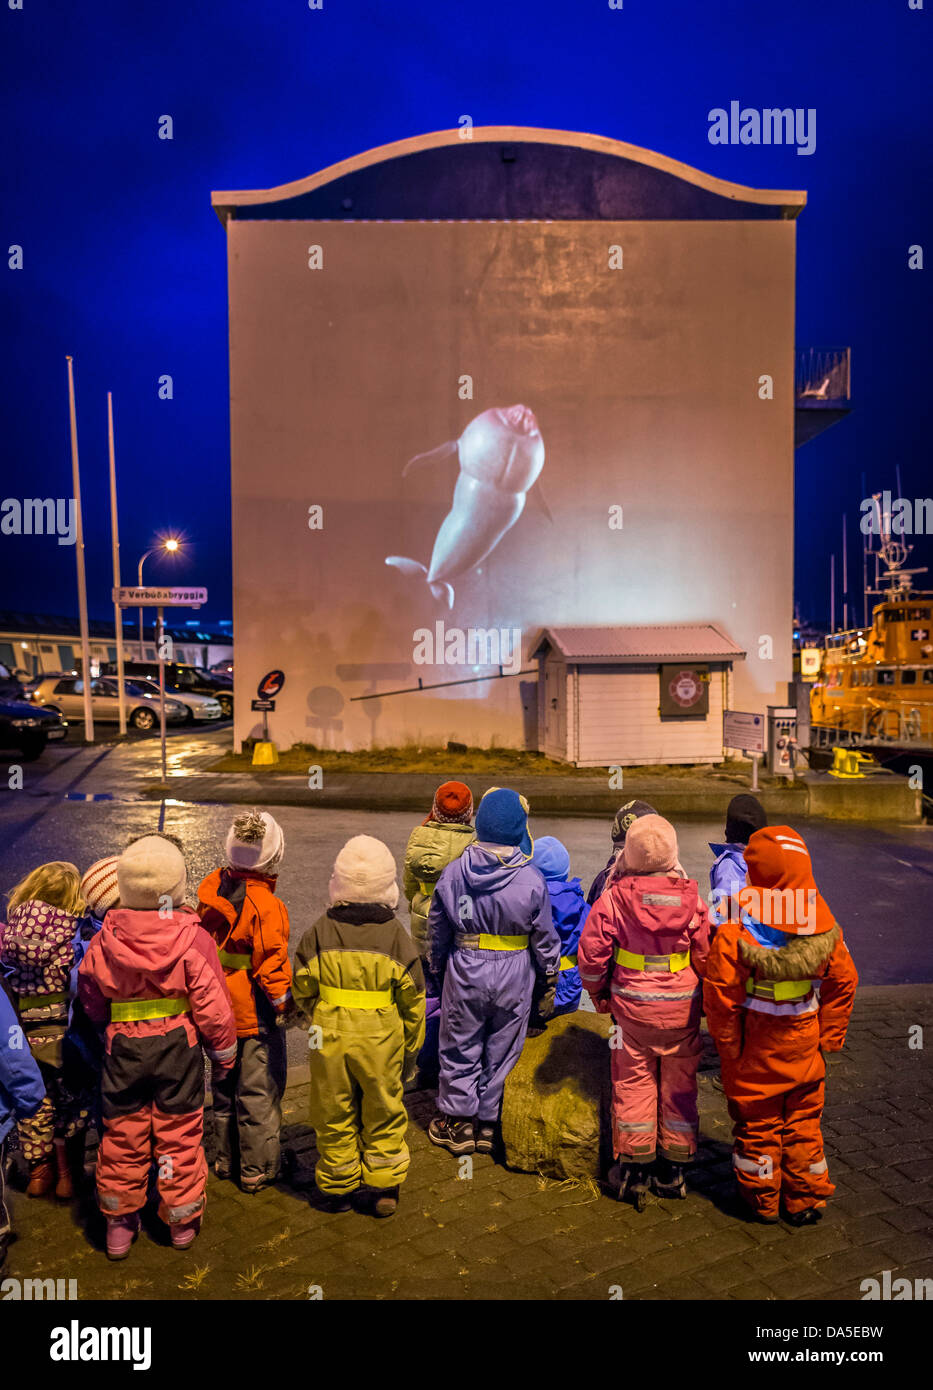 Young children looking at a hologram of a whale, Christmas time, Reykjavik, Iceland Stock Photo